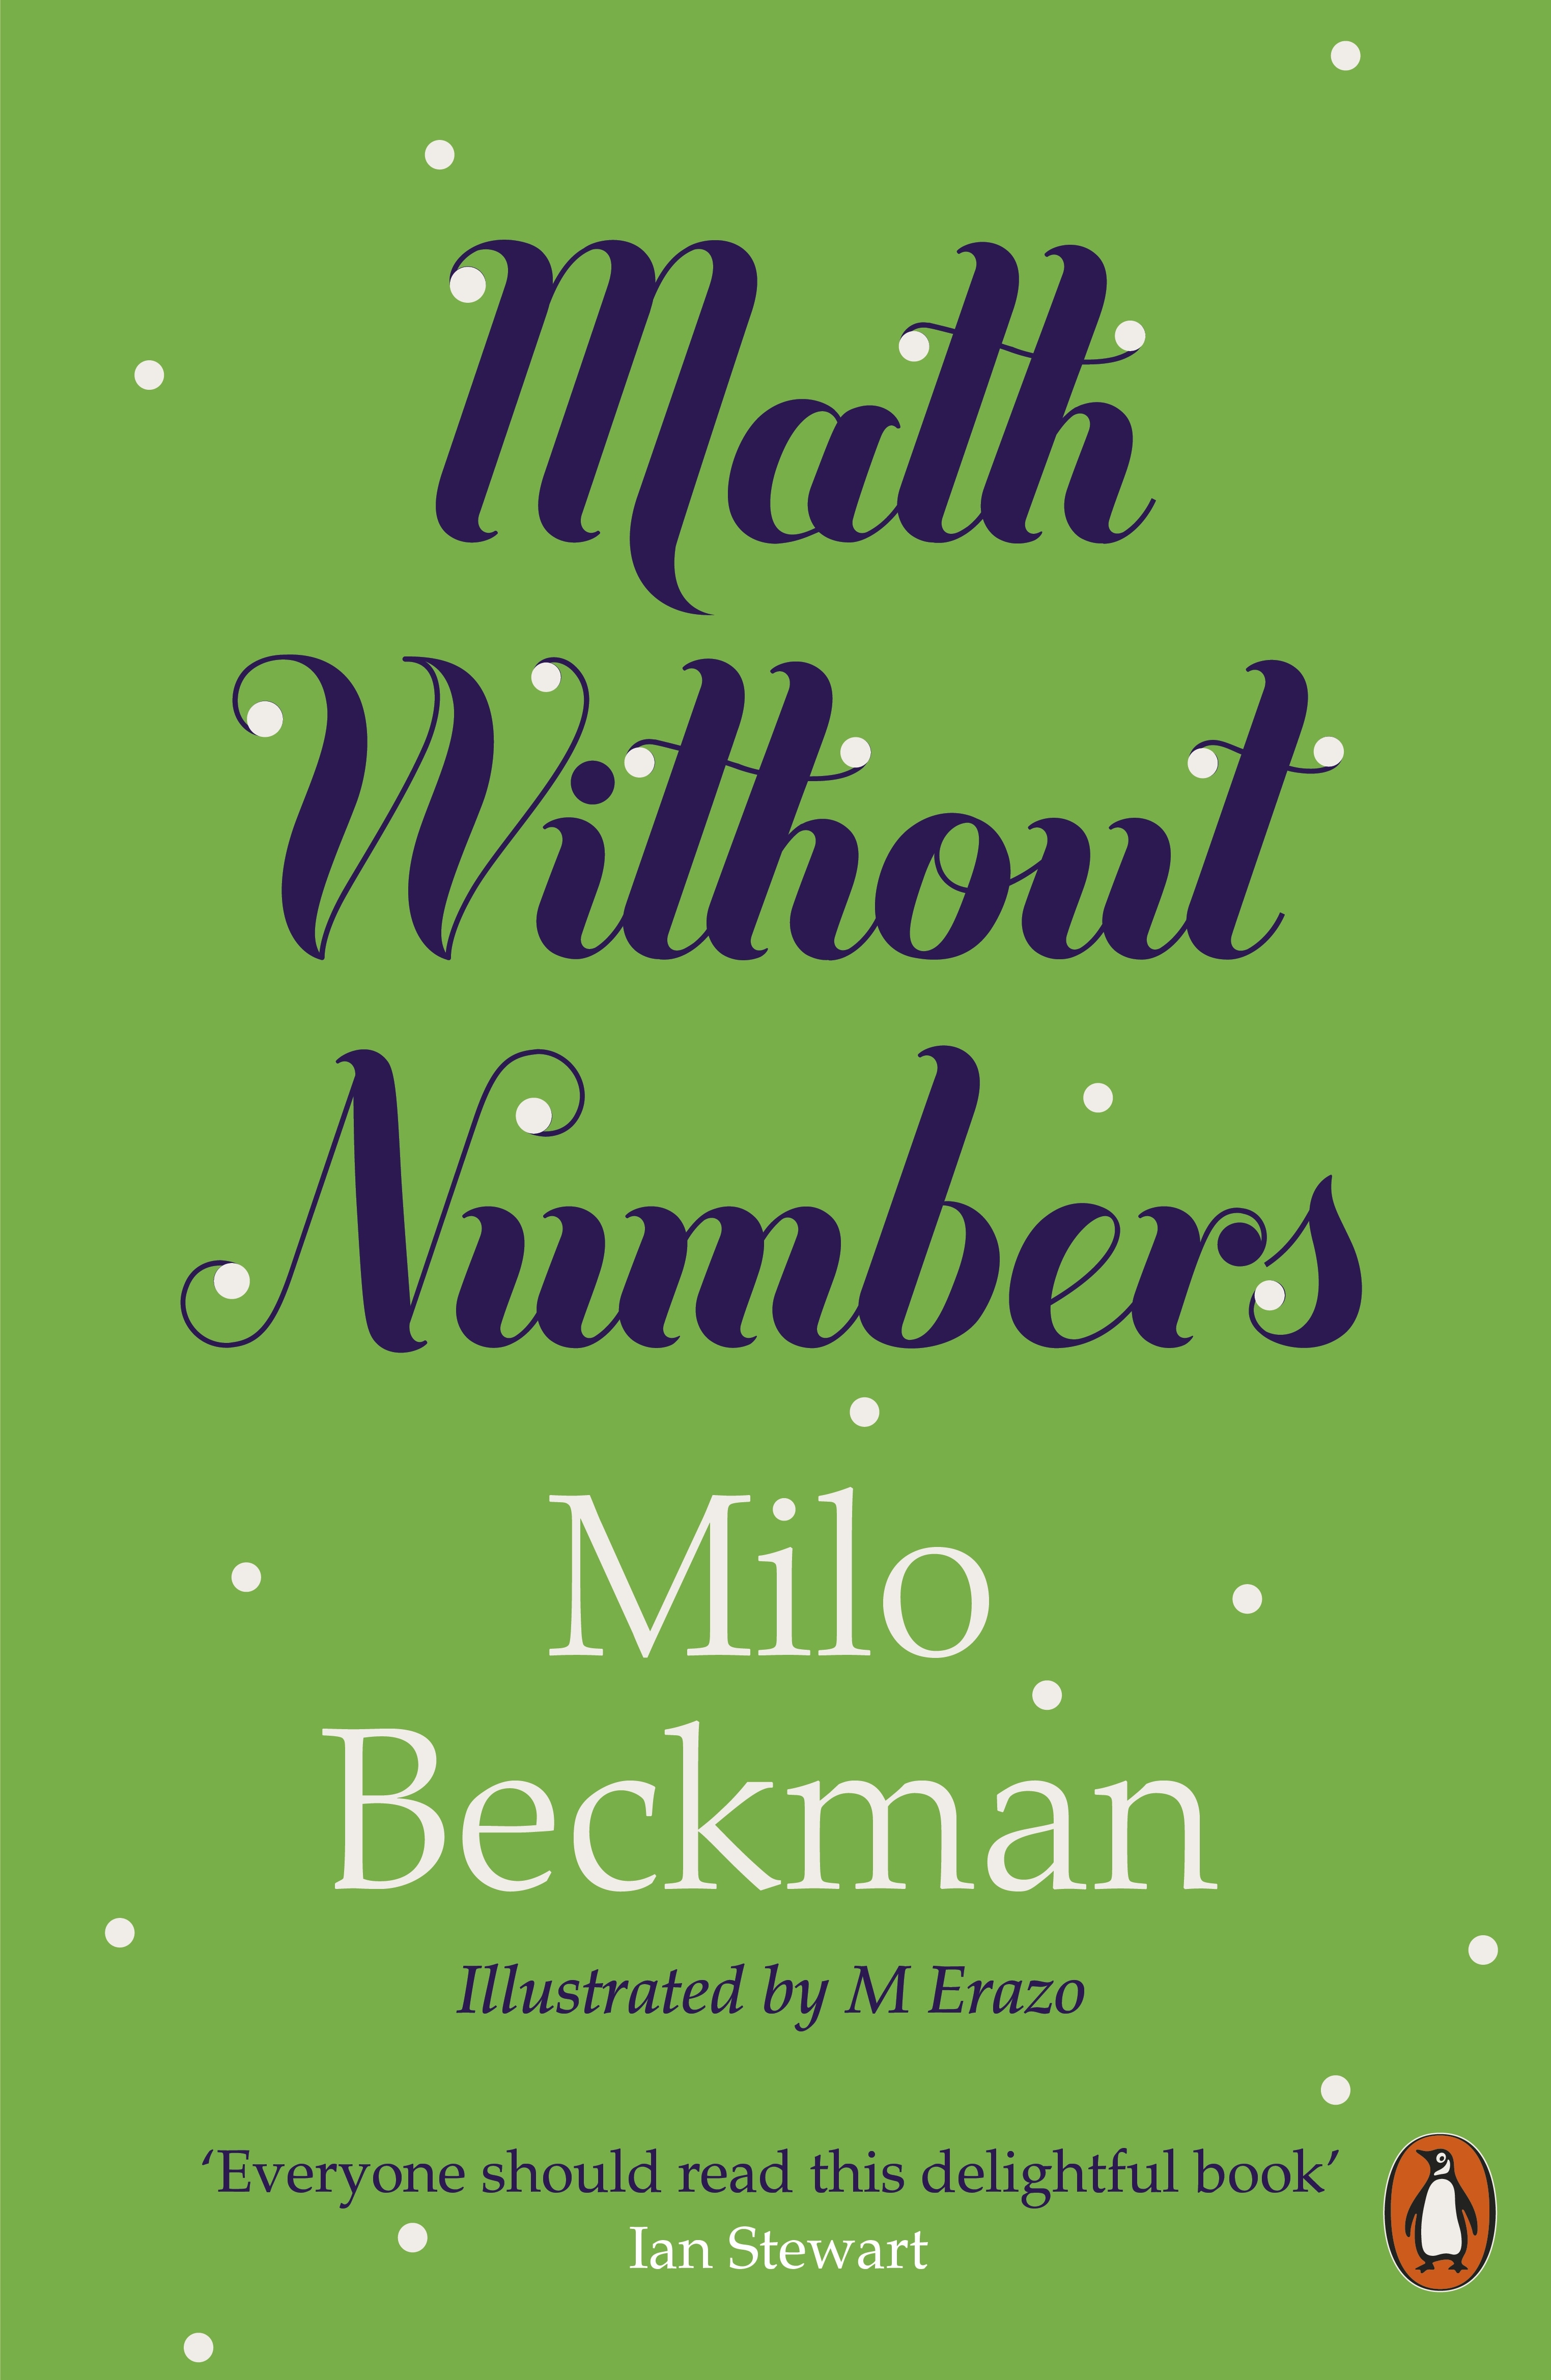 Book “Math Without Numbers” by Milo Beckman — February 3, 2022